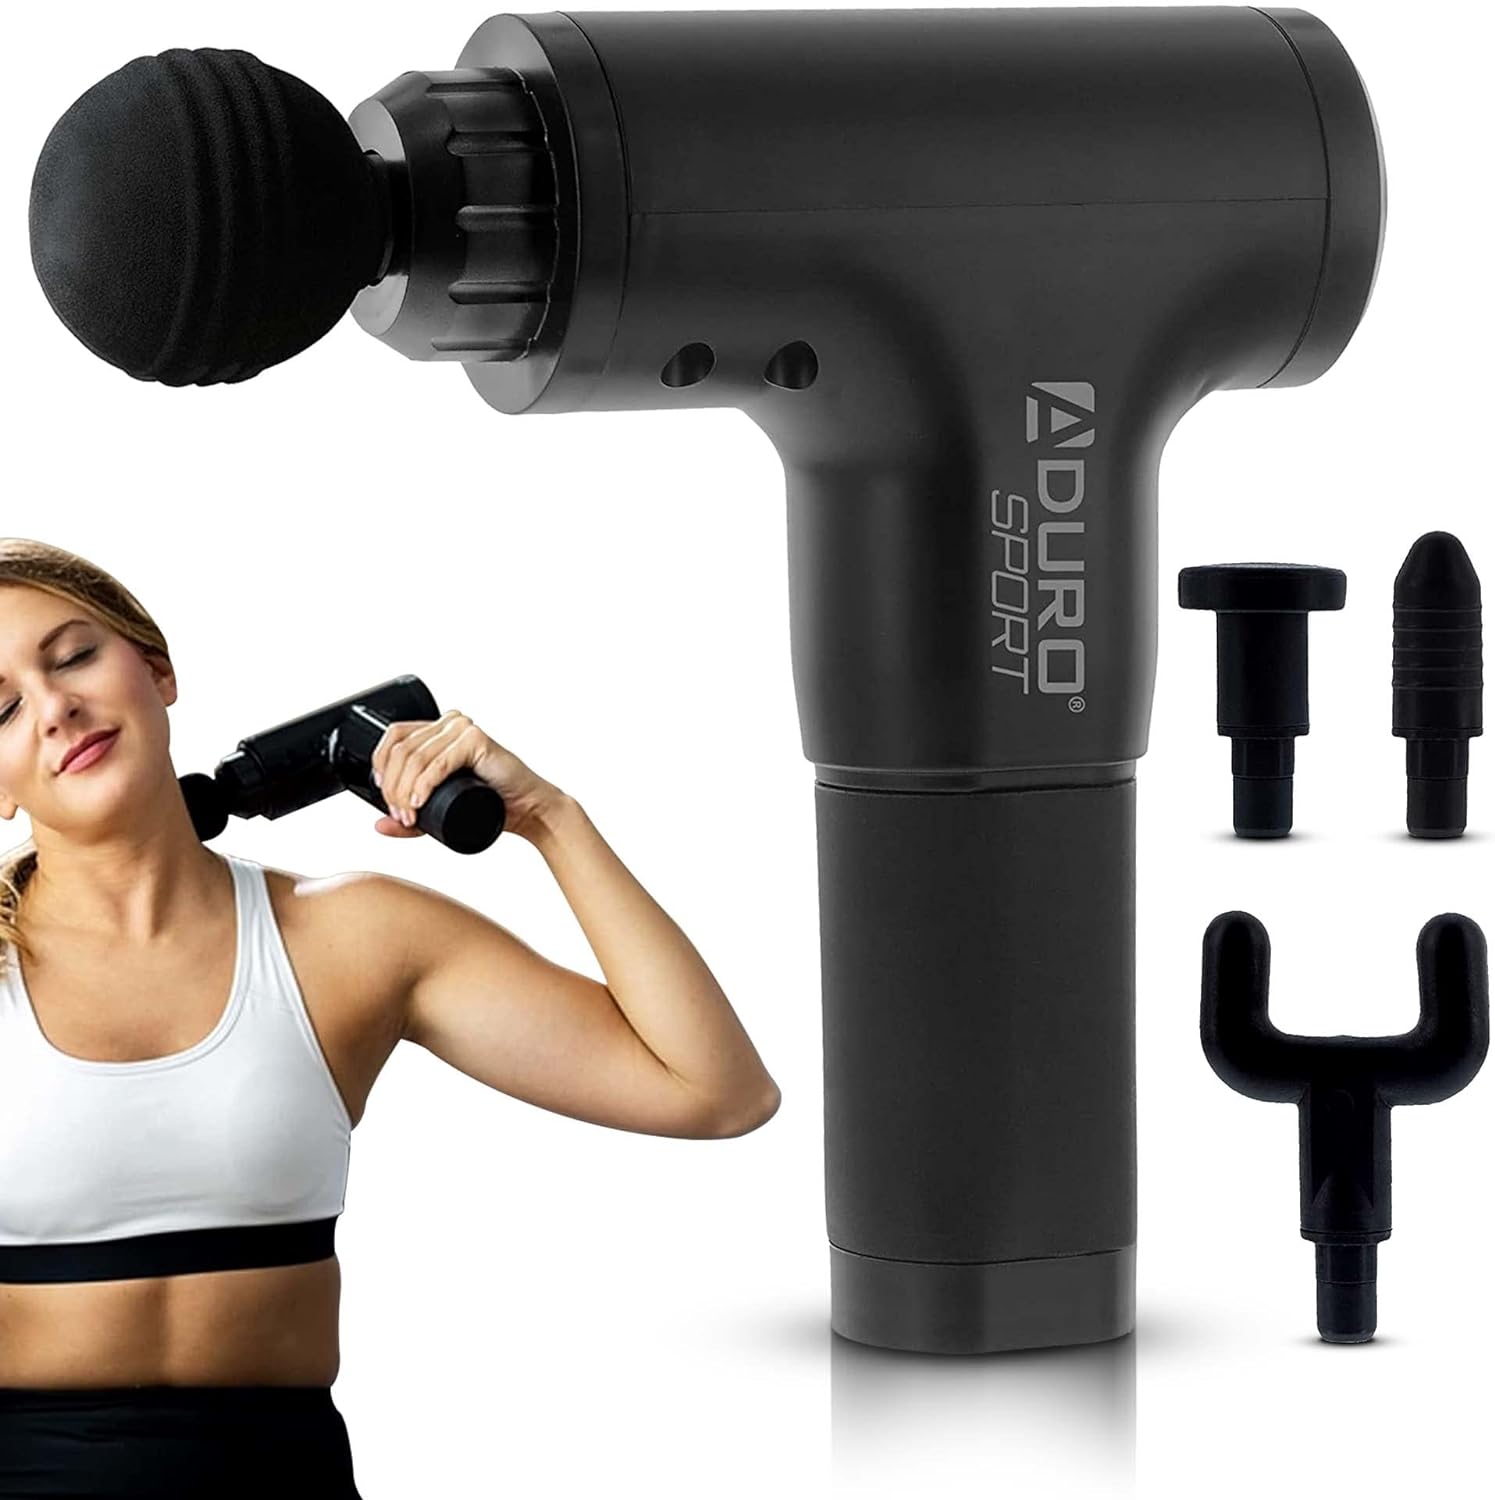 Aduro Percussion Massage Gun Deep Tissue Muscle Massage Gun Handheld, Elite Recovery Electric Hand Held Therapy Massager Gun Perfect for Athletes Full Body, Back, Neck, Shoulder Pain Relief (Black)